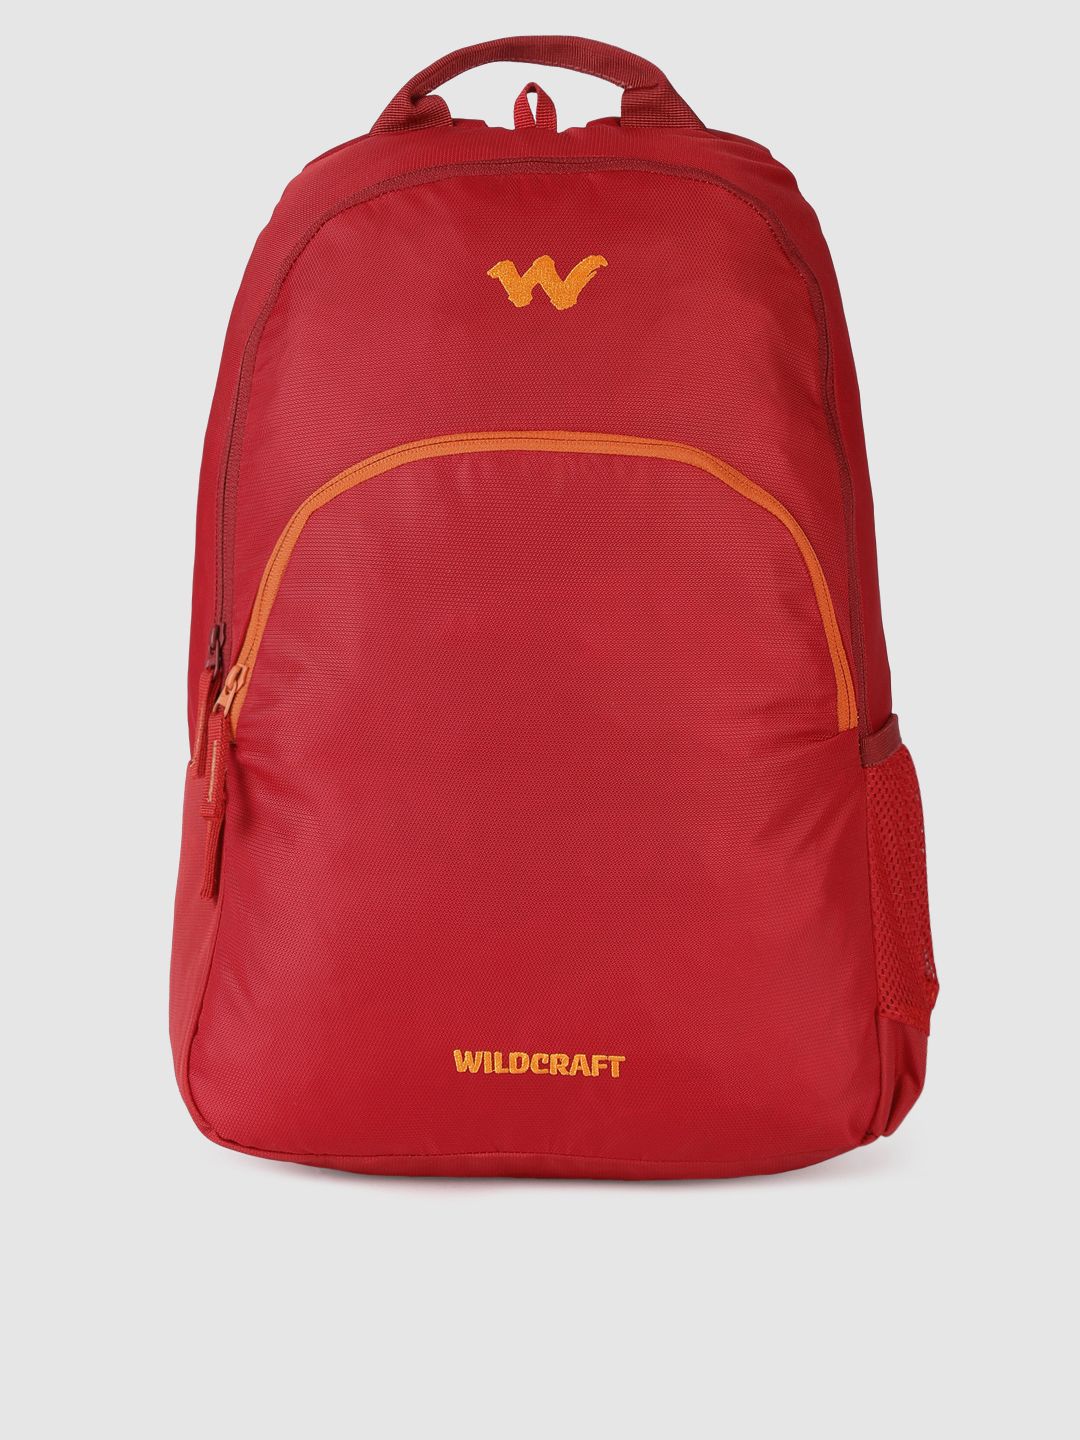 Wildcraft Unisex Red Compact Solid Backpack Price in India